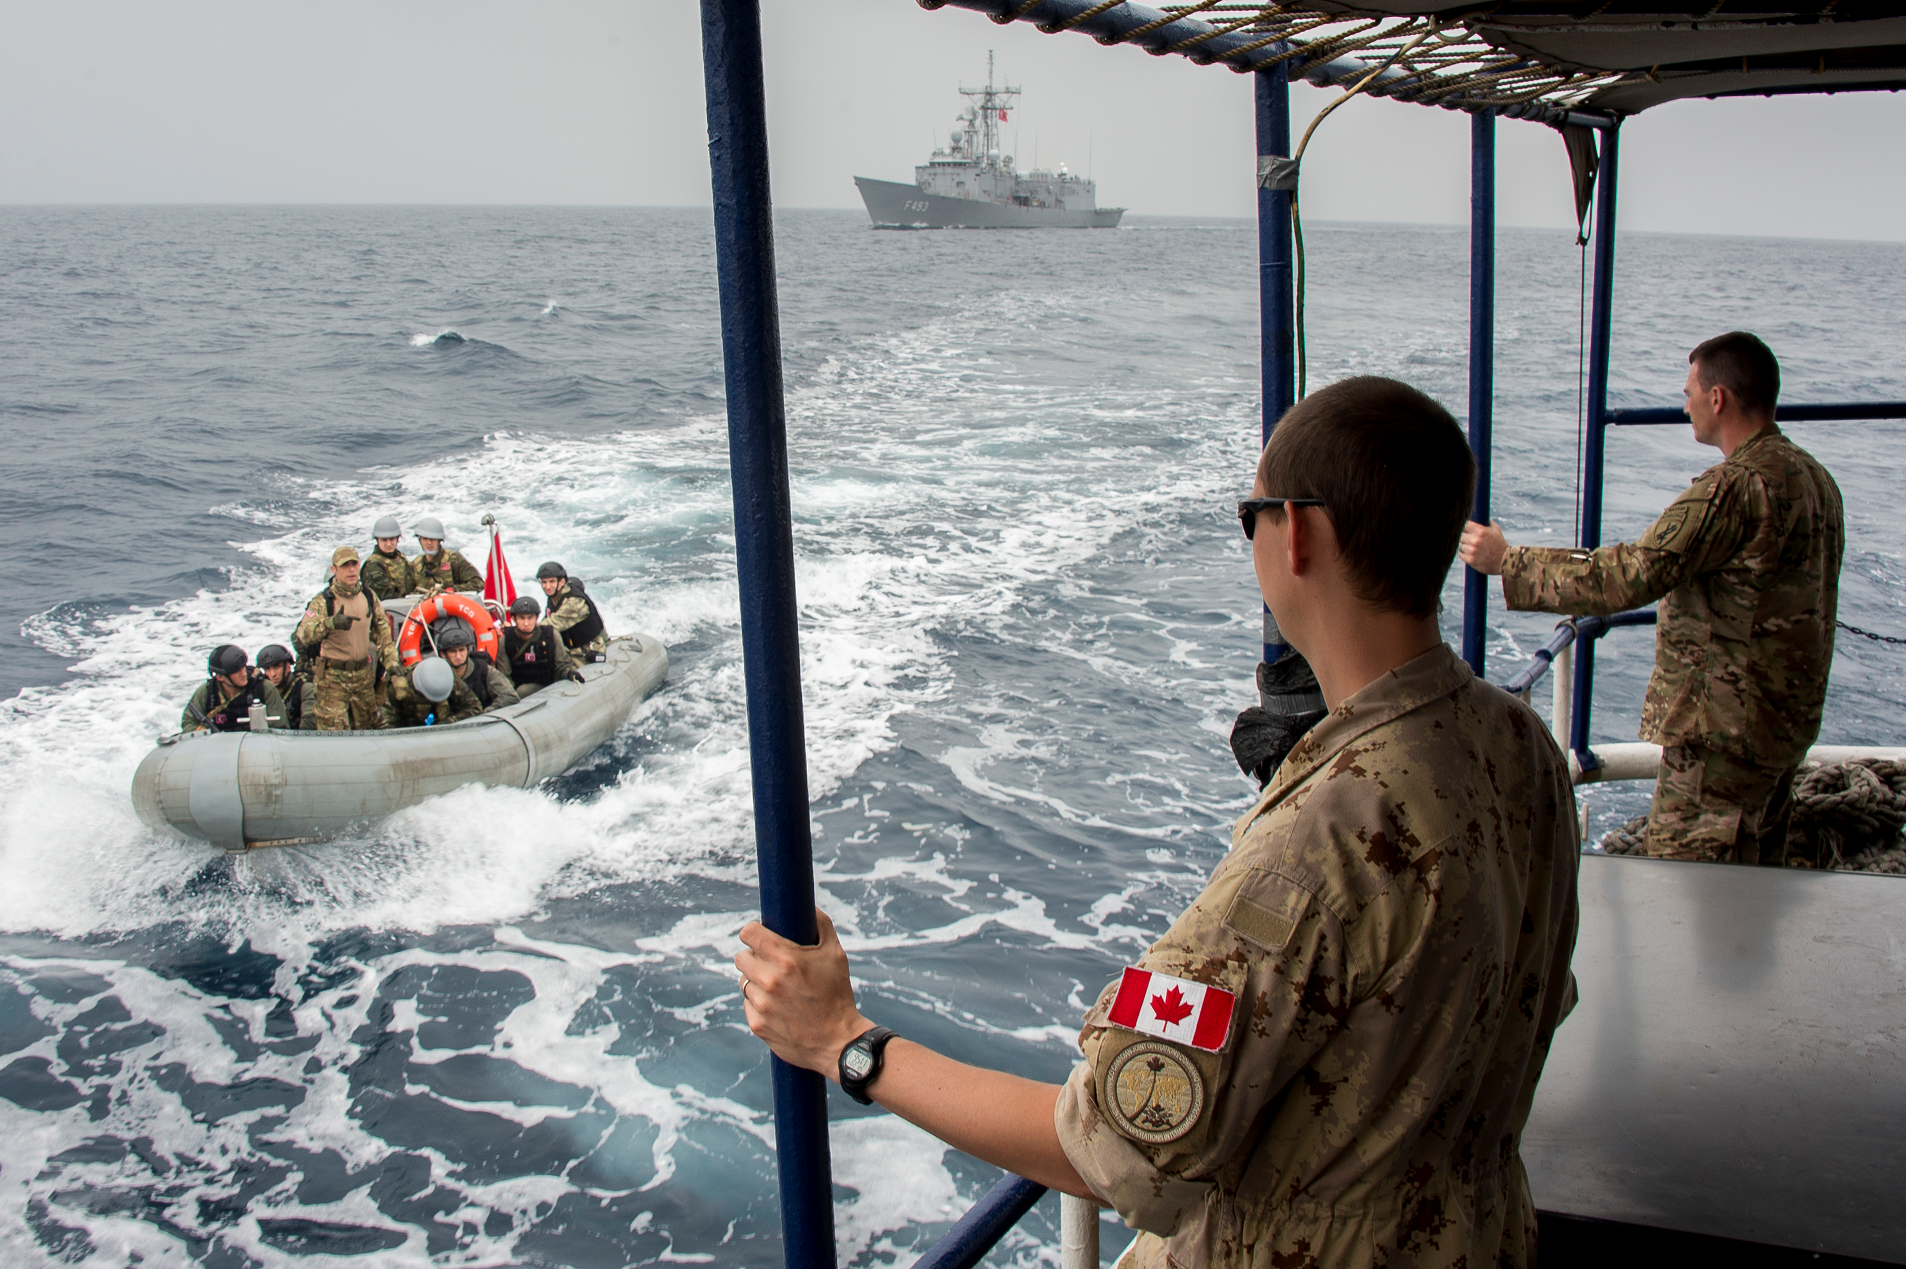 February 4, 2017. Lieutenant-Navy François Gaudreault observes the Turkish boarding party boat approaching the target vessel during Exercise CUTLASS EXPRESS on February 4, 2017 in Djibouti, Africa. (Photo: Master Corporal Mathieu Gaudreault, Canadian Forces Combat Camera)